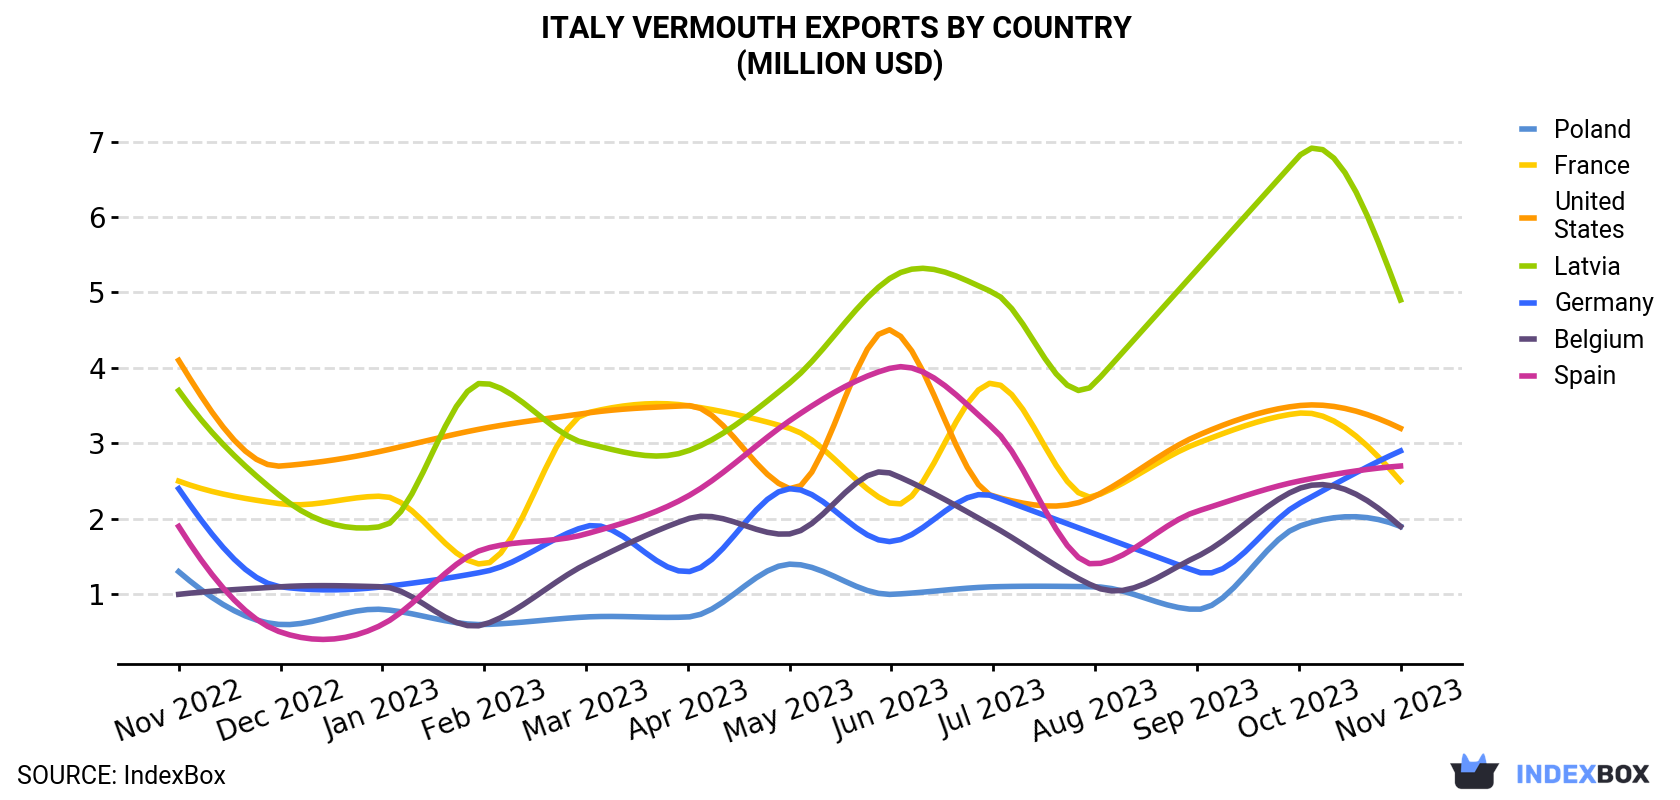 Italy Vermouth Exports By Country (Million USD)